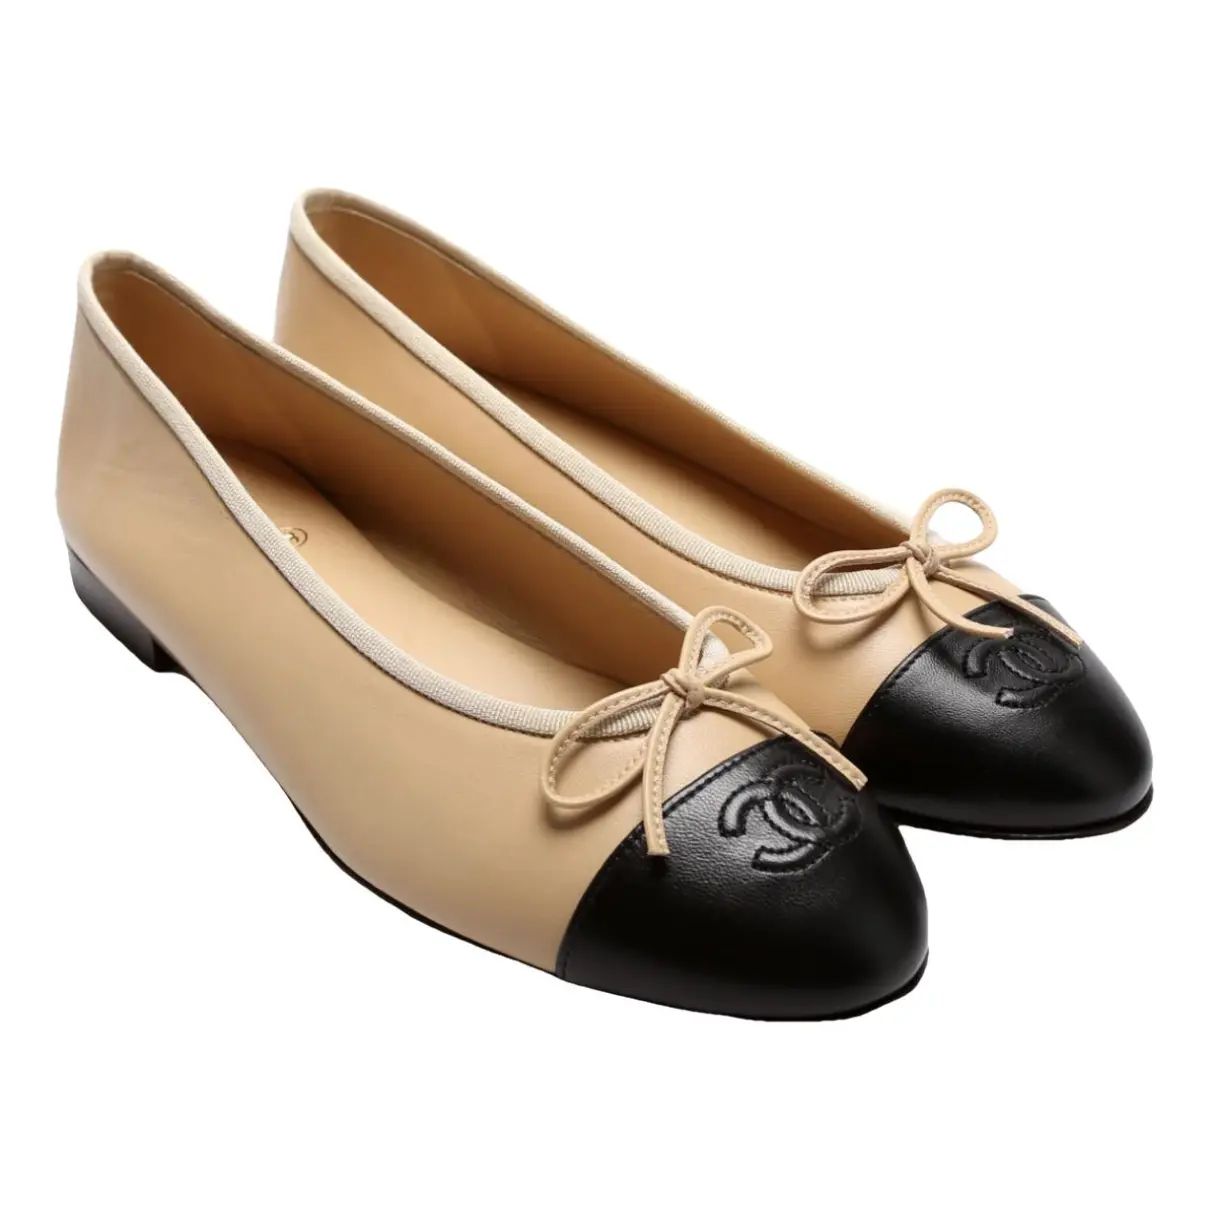 ChanelLeather flats37EUNever wornBeige, Leather$1,375$1,182.50$30 discount with the code* WELCOME... | Vestiaire Collective (Global)